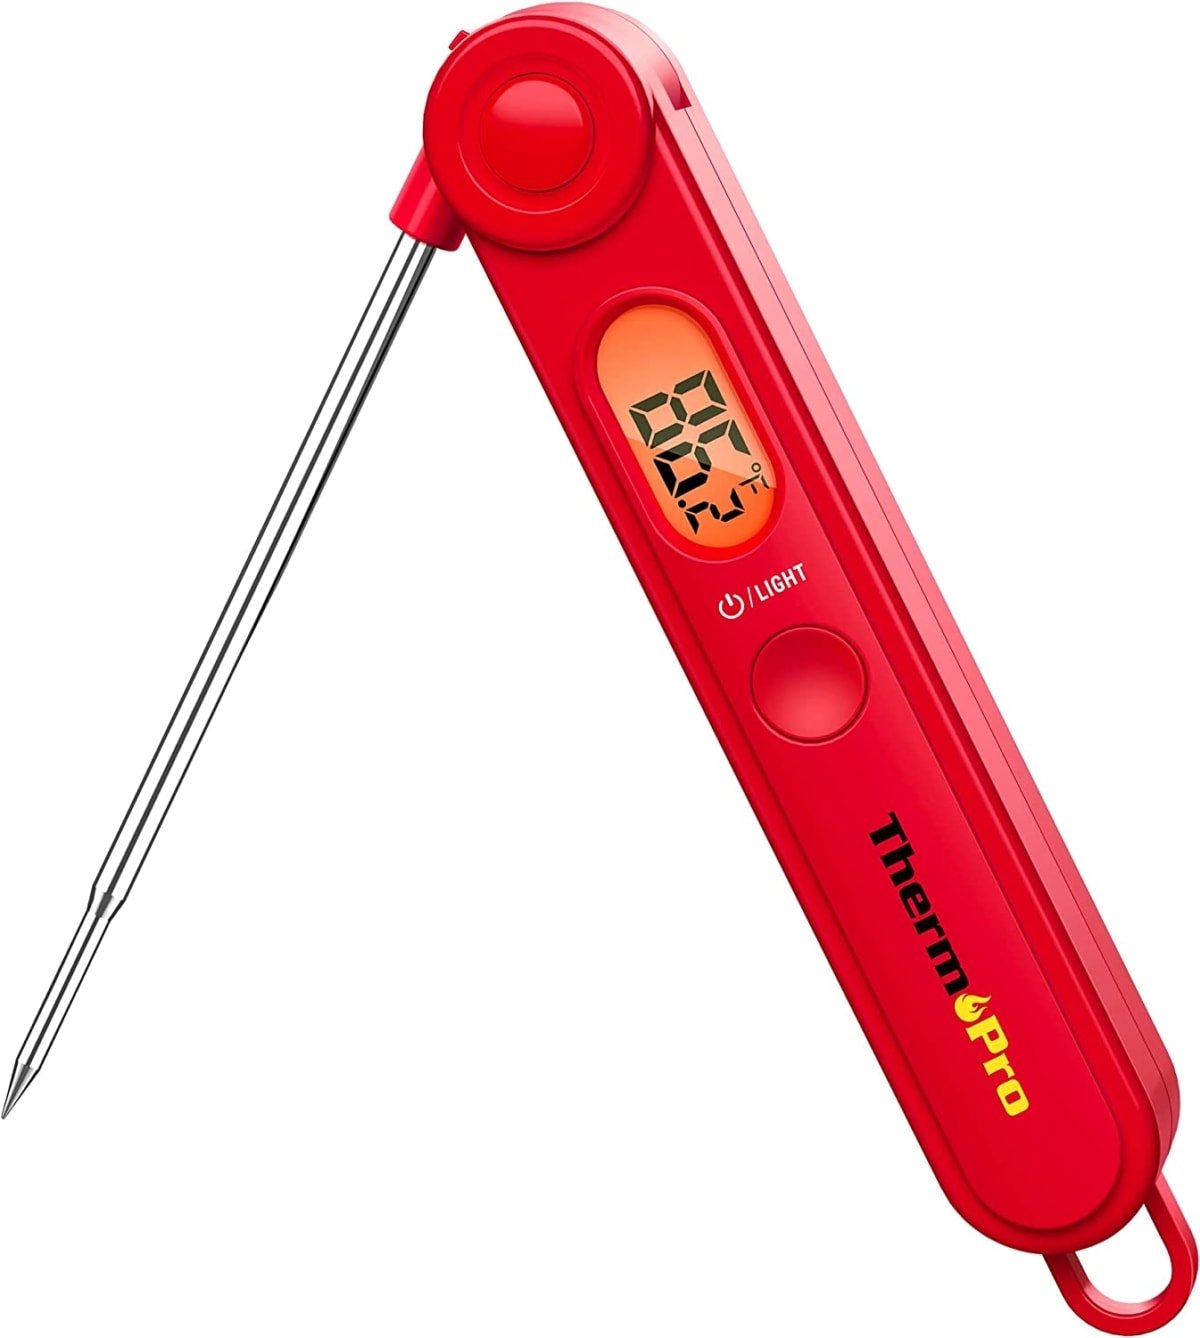 My favorite meat thermometer. 